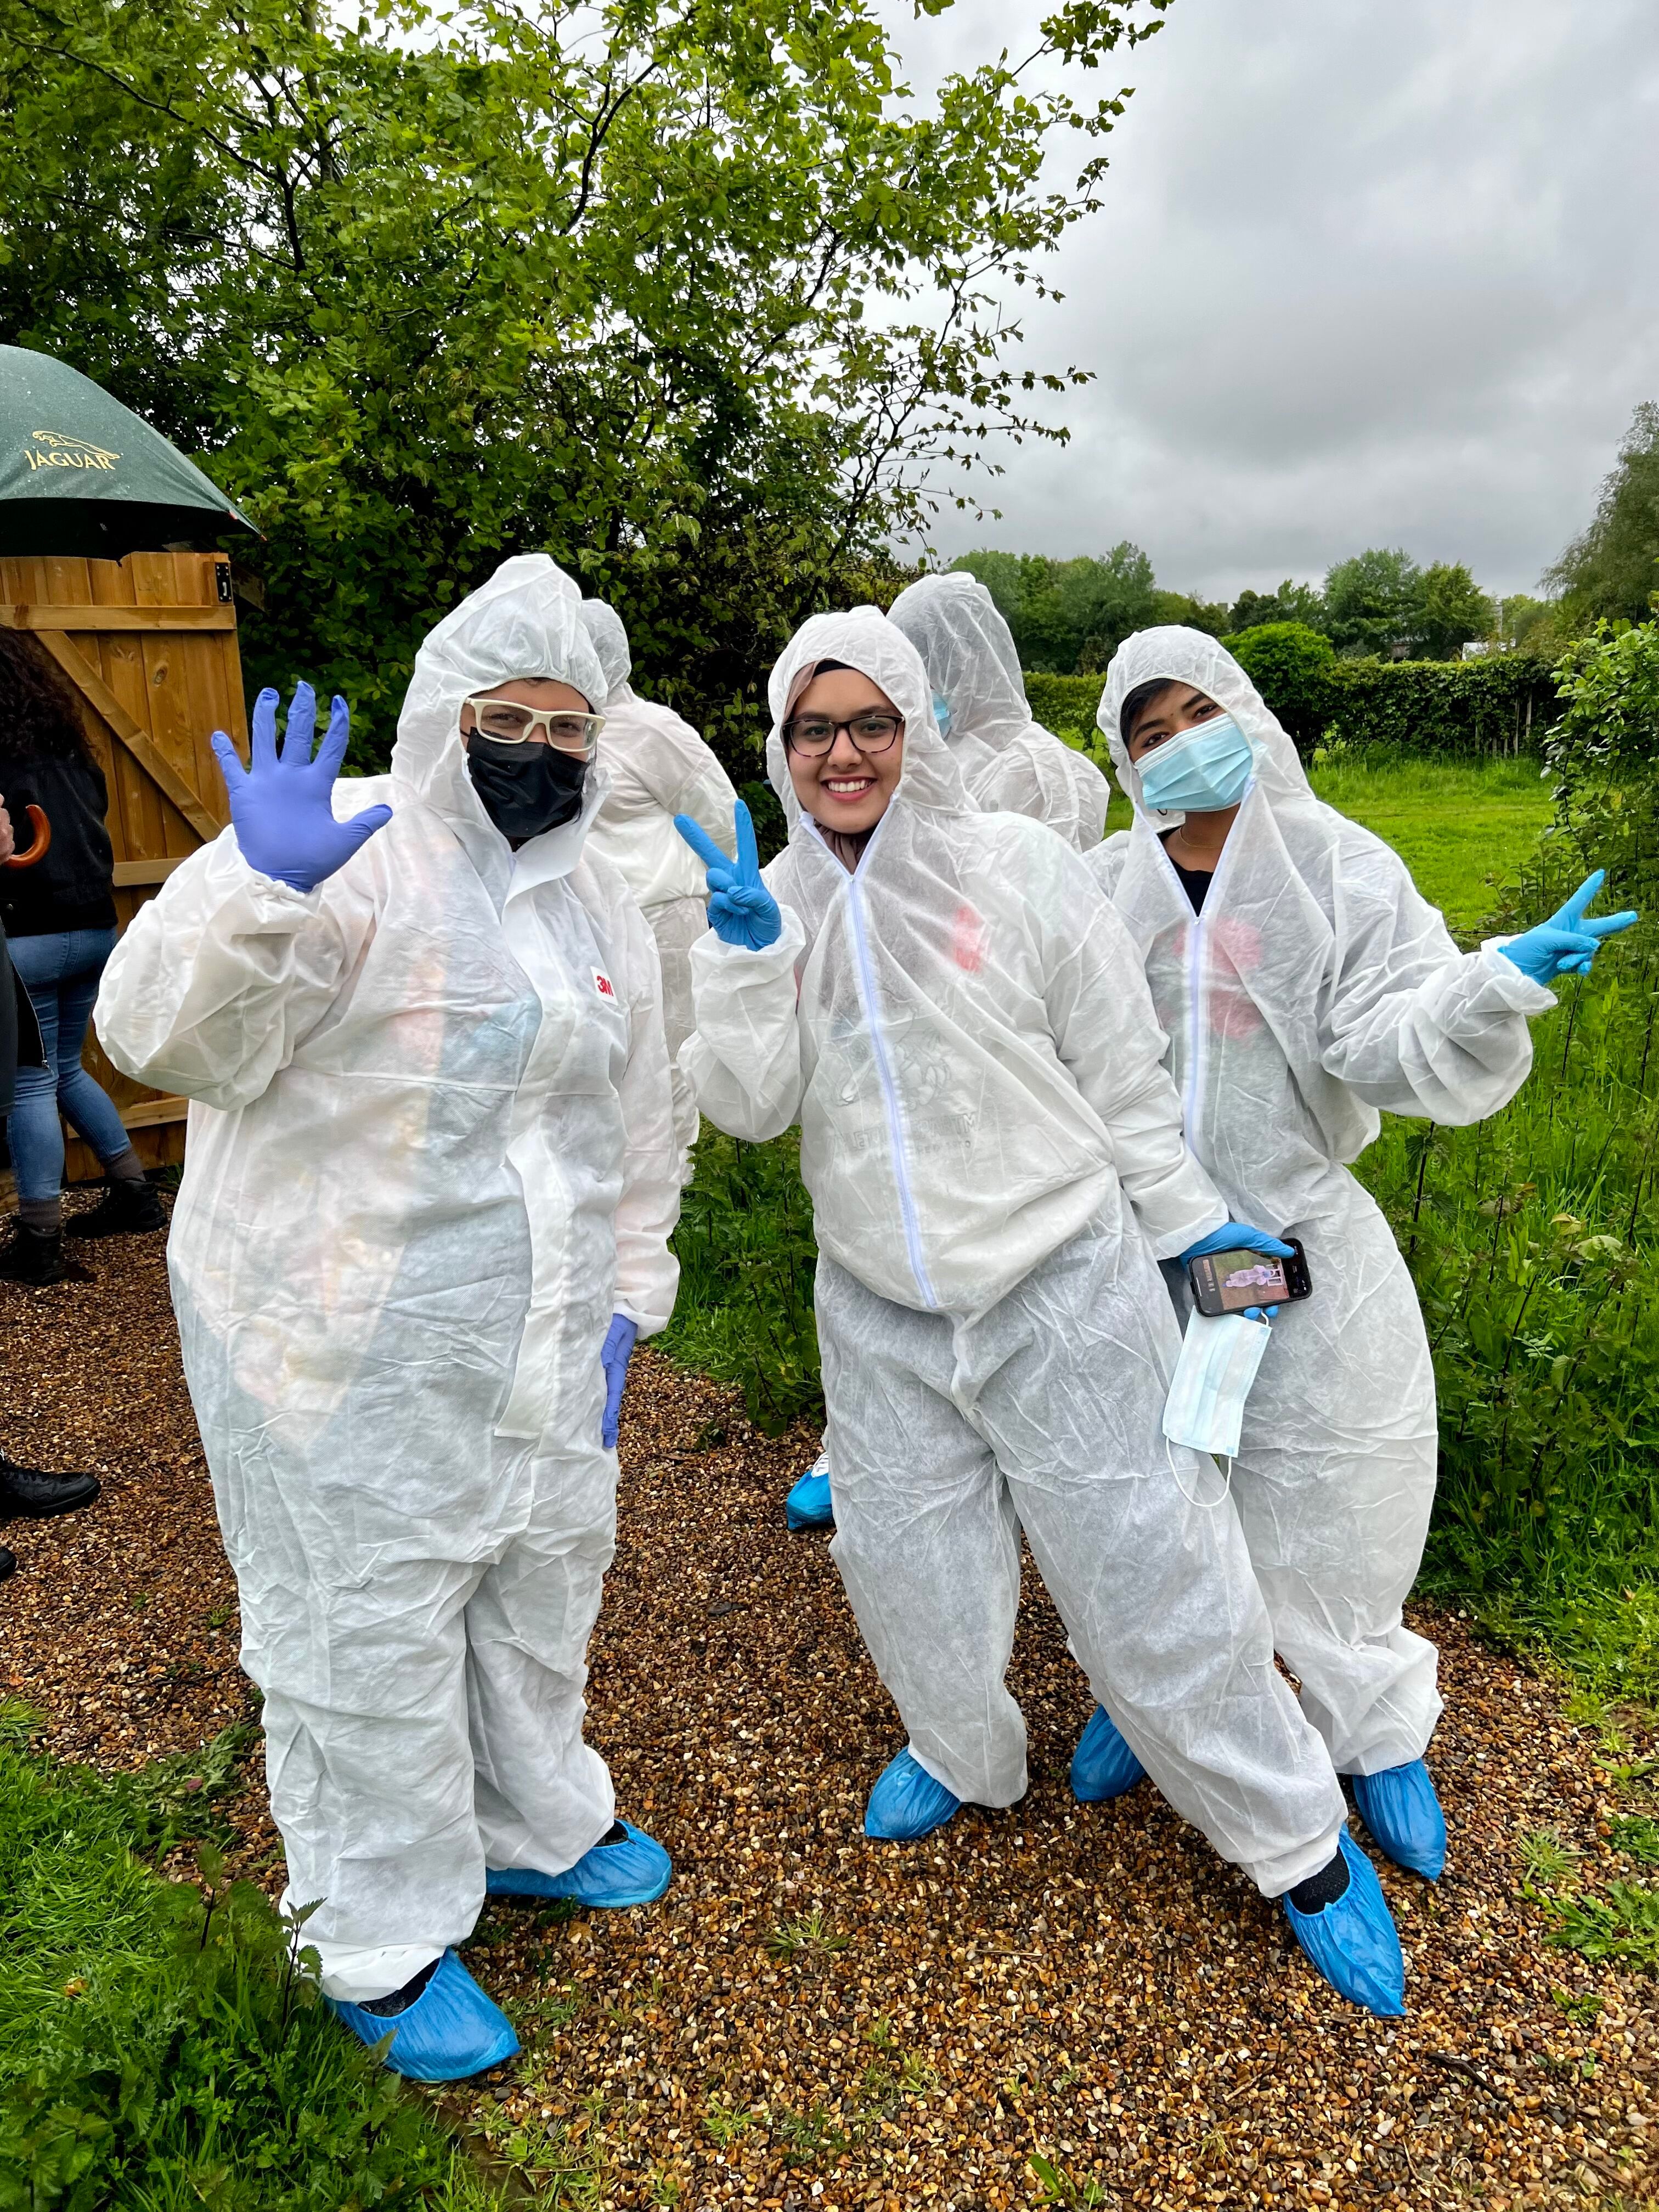 Amity students pose in their biohazard suits in the crime scene facility garden